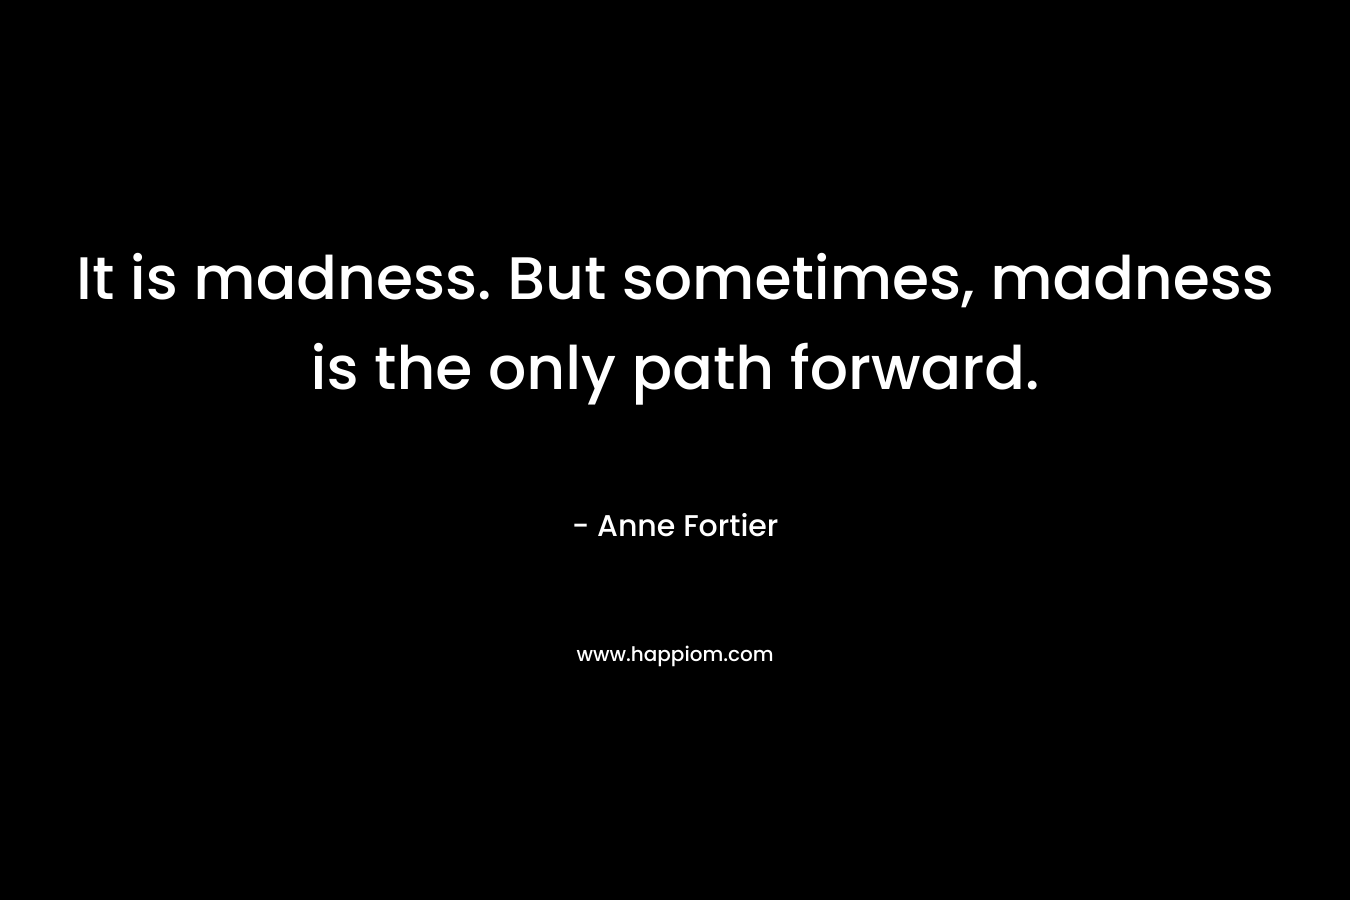 It is madness. But sometimes, madness is the only path forward. – Anne Fortier